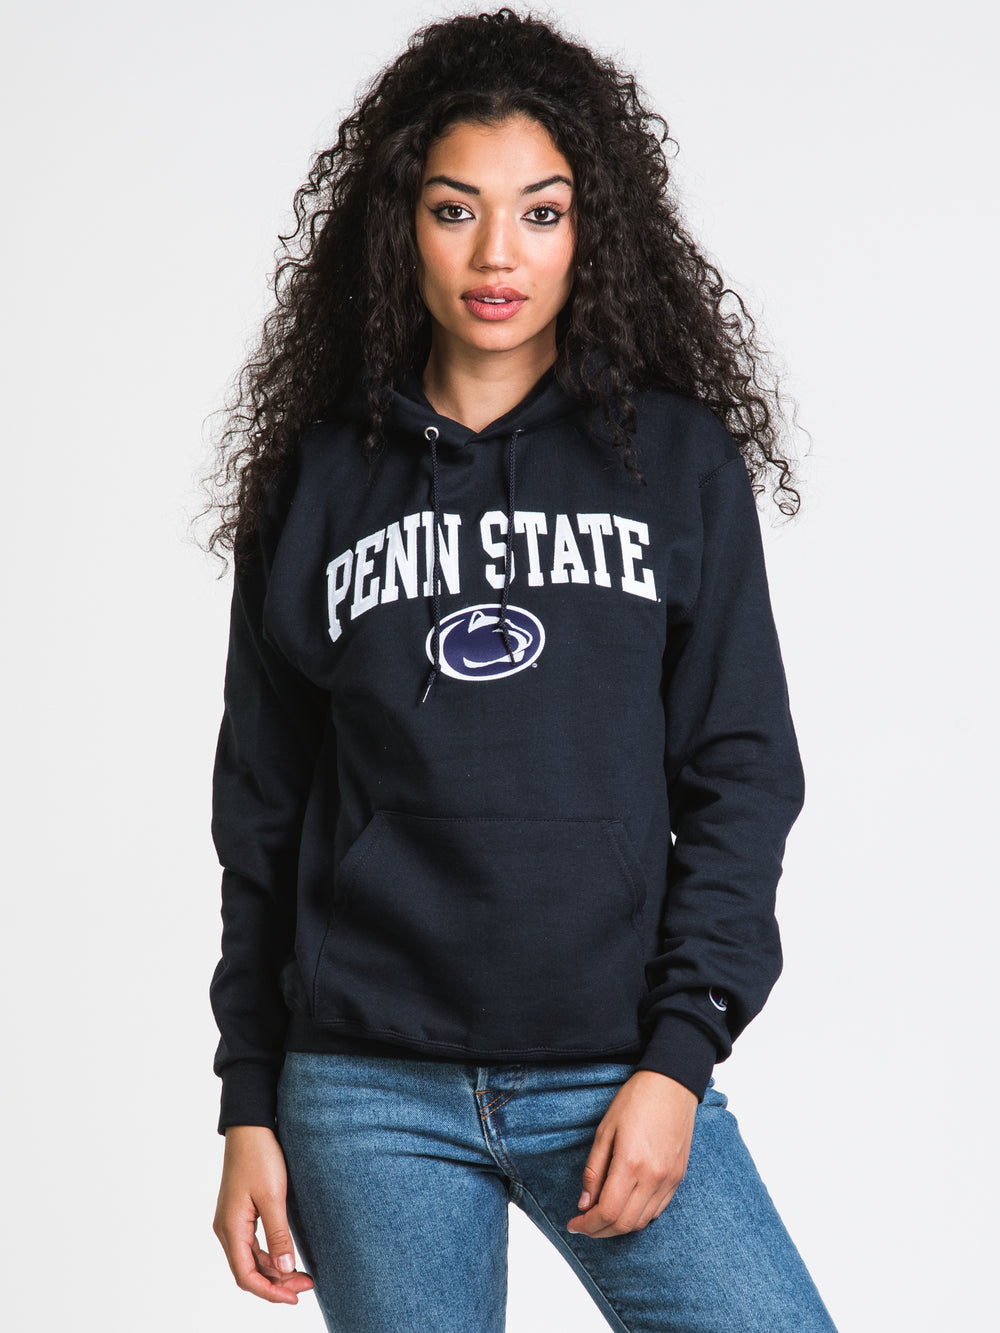 CHAMPION ECO POWERBLEND PENN STATE HOODIE - CLEARANCE